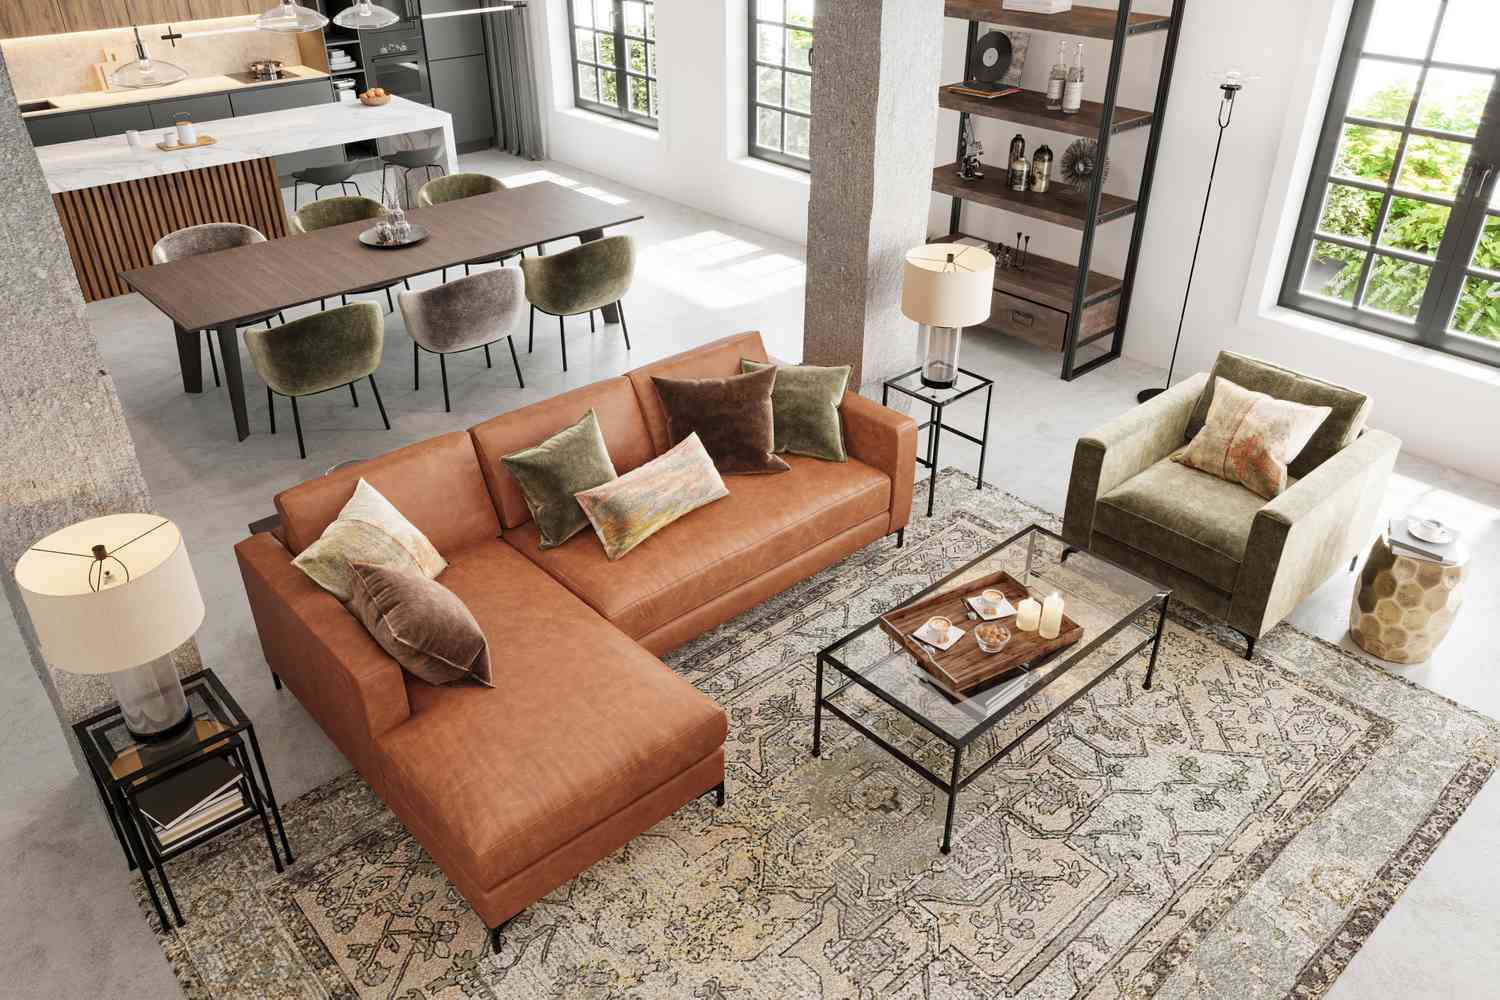 Decorating Open Floor Plans: Creating cohesive and stylish open spaces.